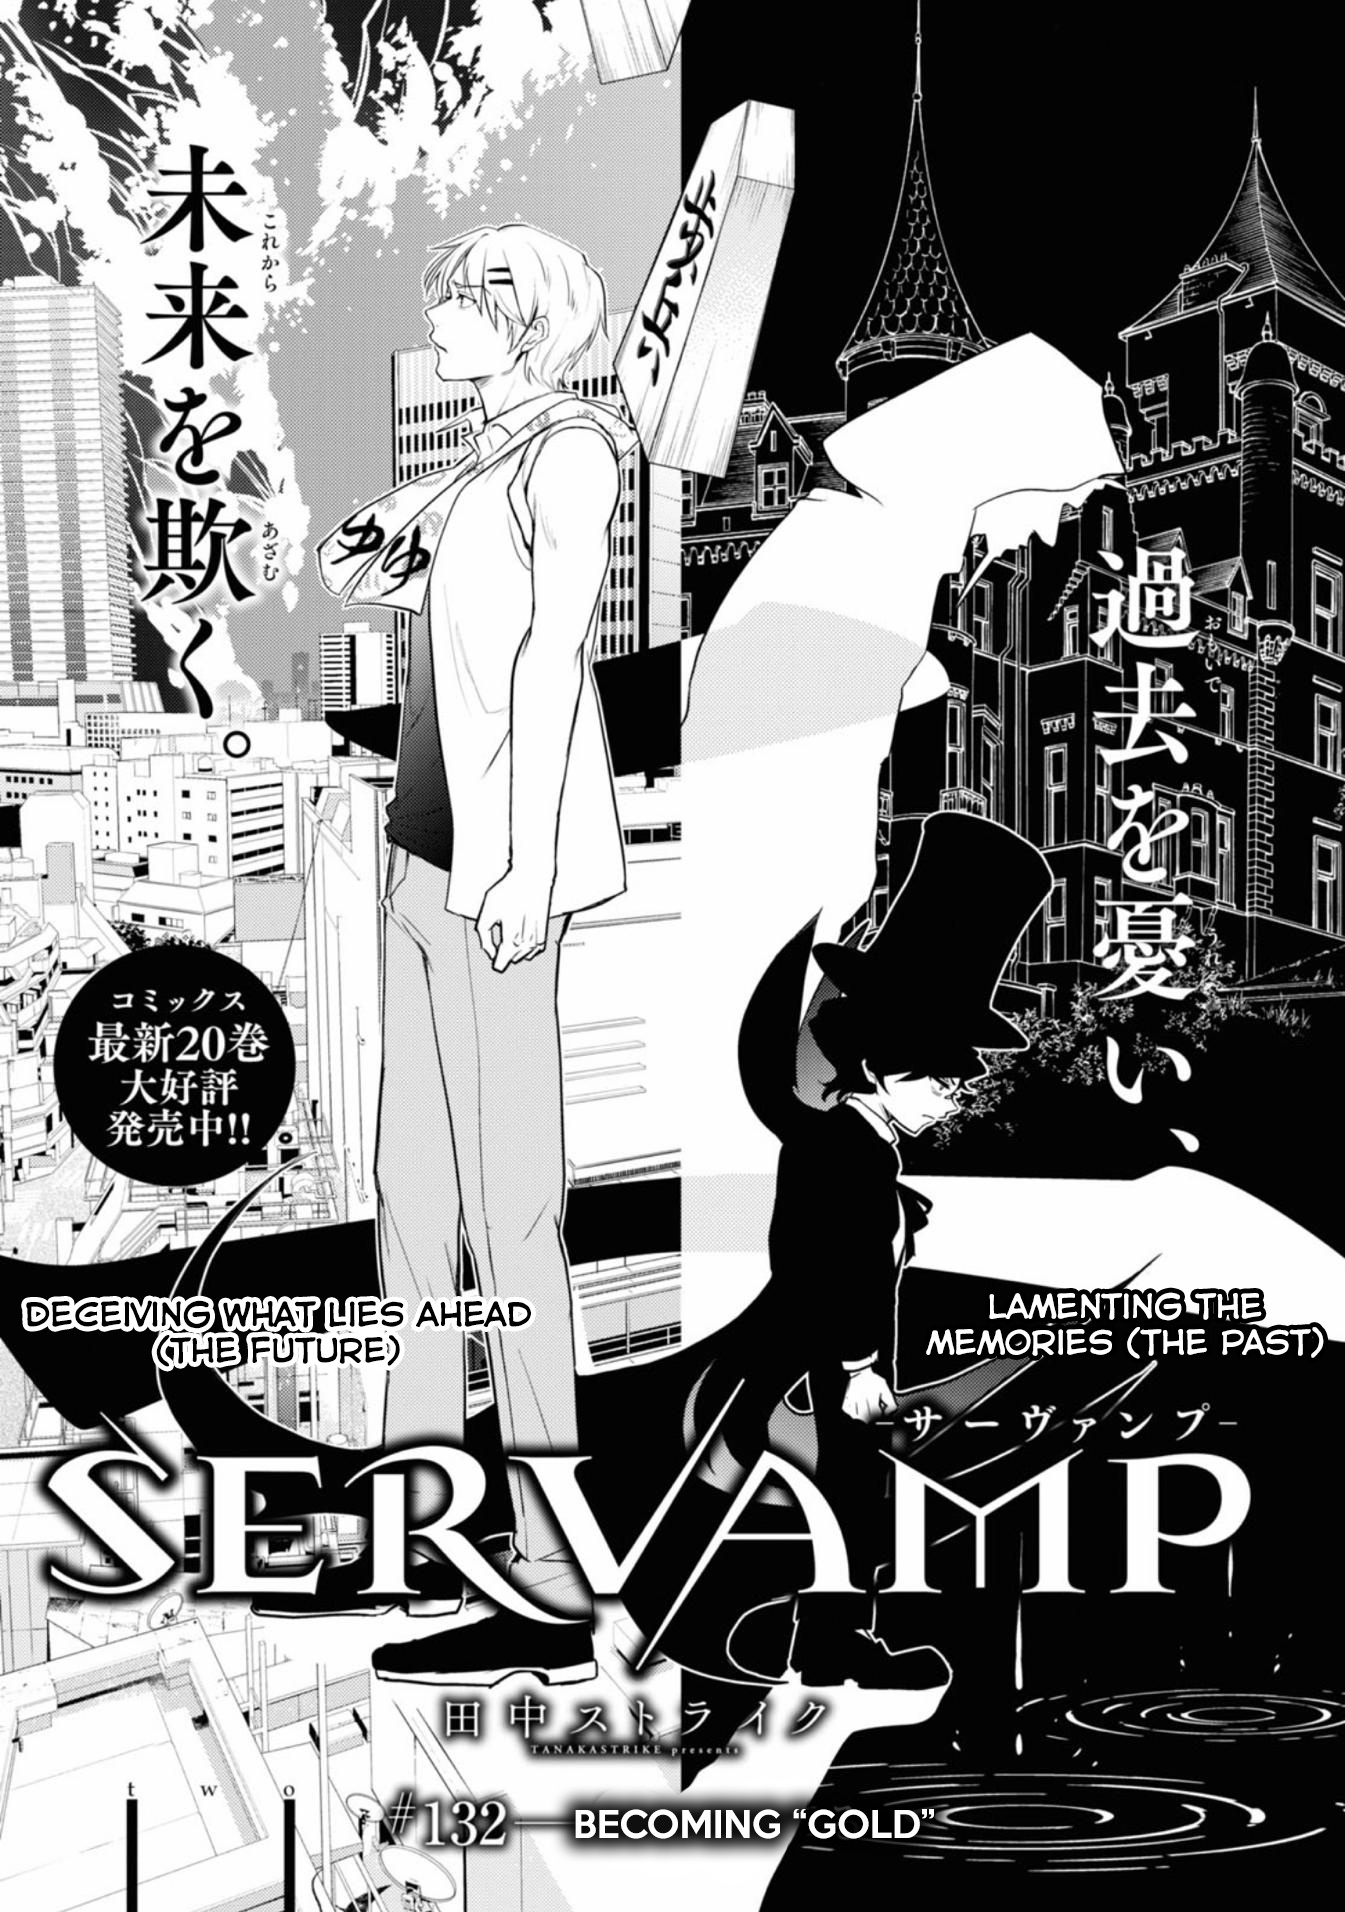 Servamp Chapter 132: Becoming 